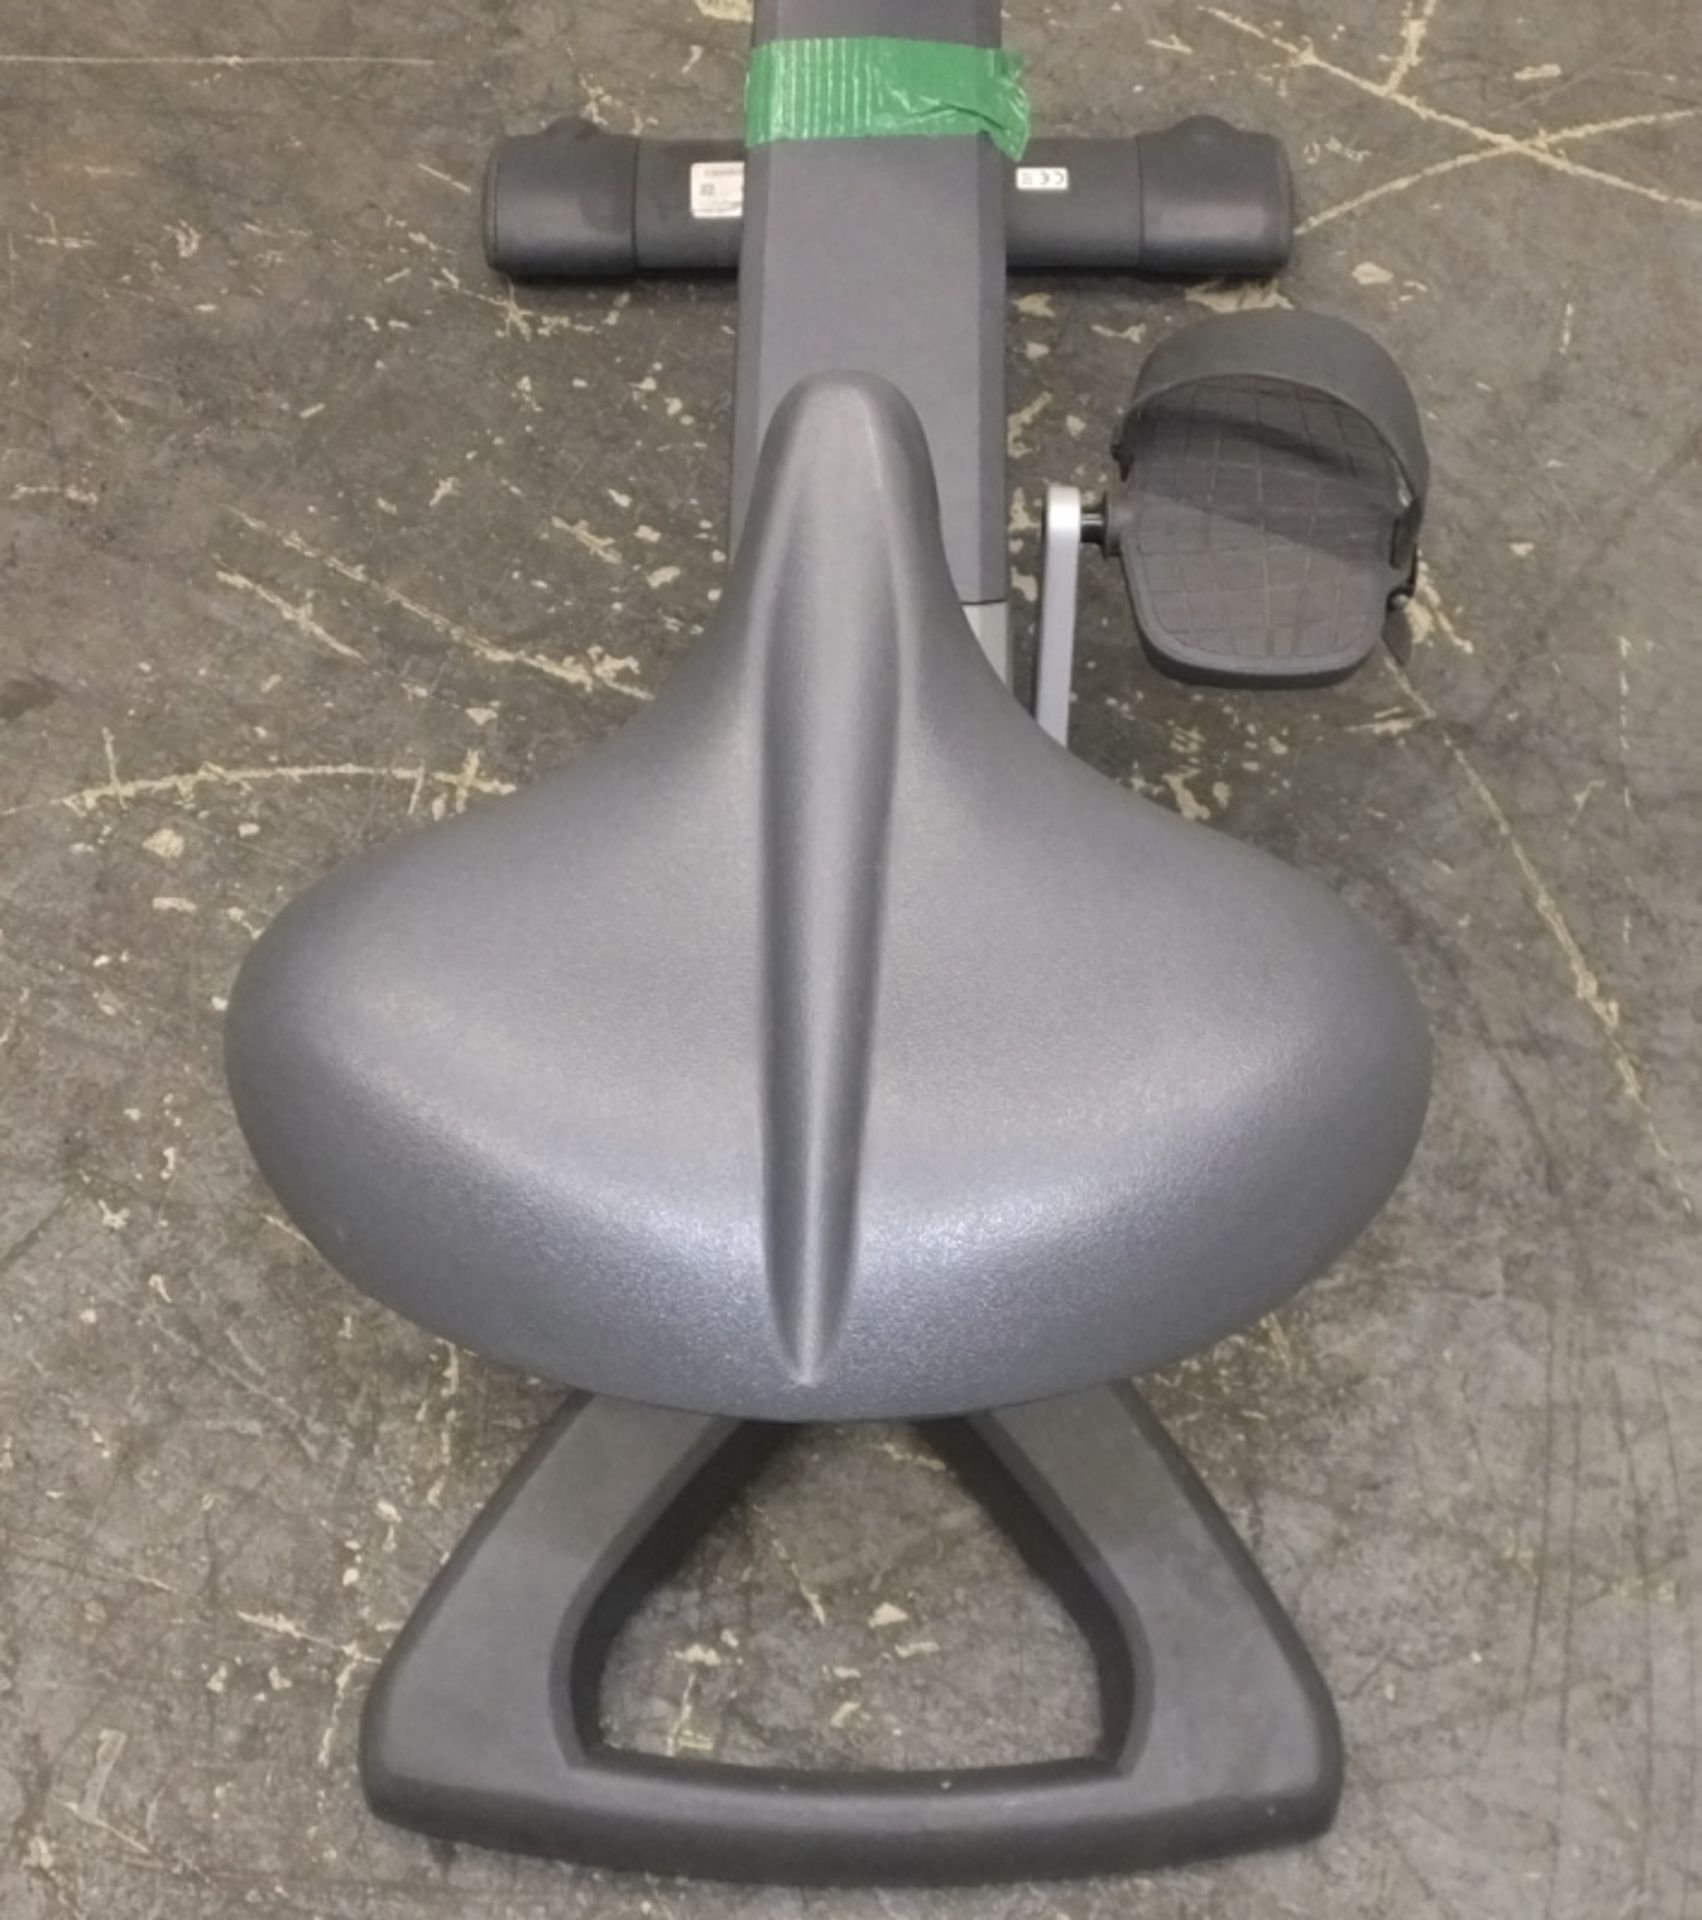 Life Fitness 95c Lifecycle Exercise Bike - Please check pictures for condition - Image 3 of 13